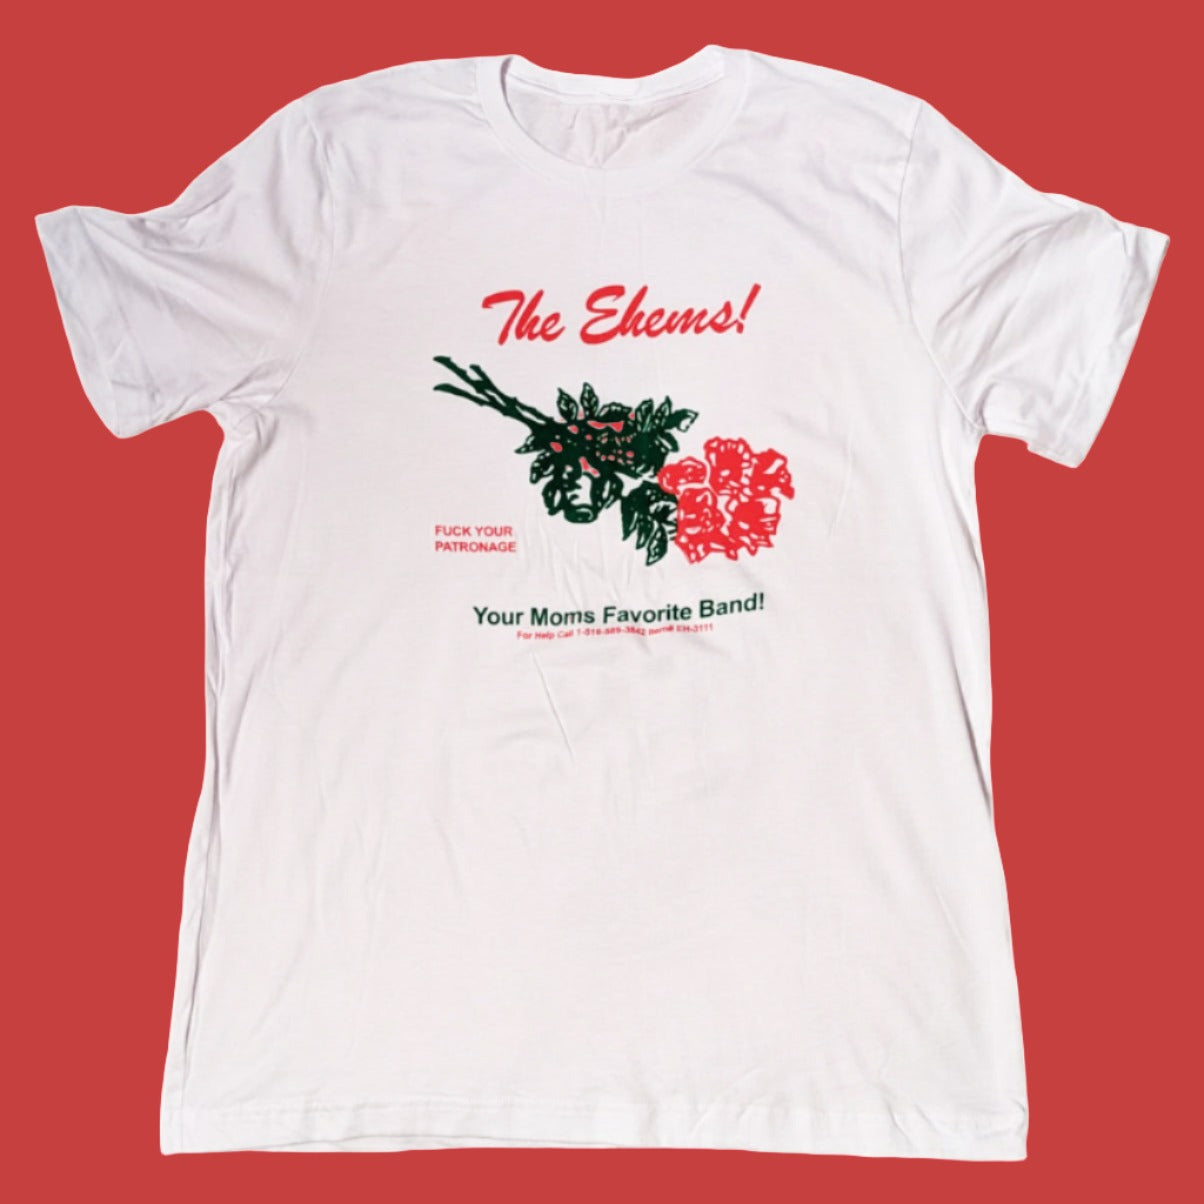 The Ehems "Roses For Your Mom" T-Shirt | OlIO Music & Arts - A New York Based Arts Collective